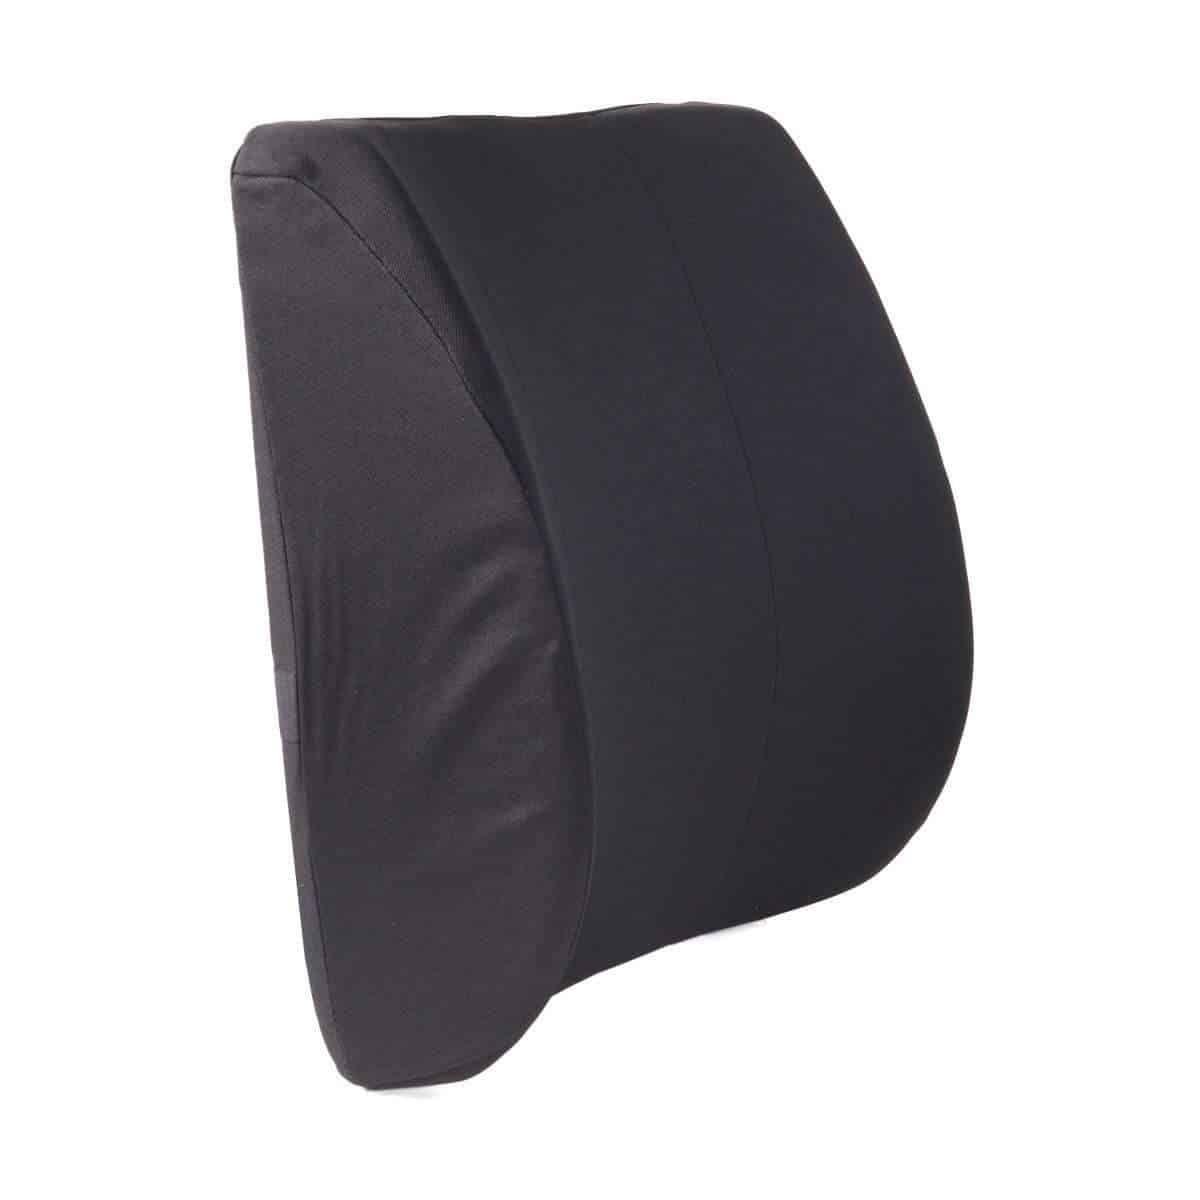 DMI Relax-a-Bac Lumbar Support Back Cushions with Insert and Strap - Senior.com Cushions